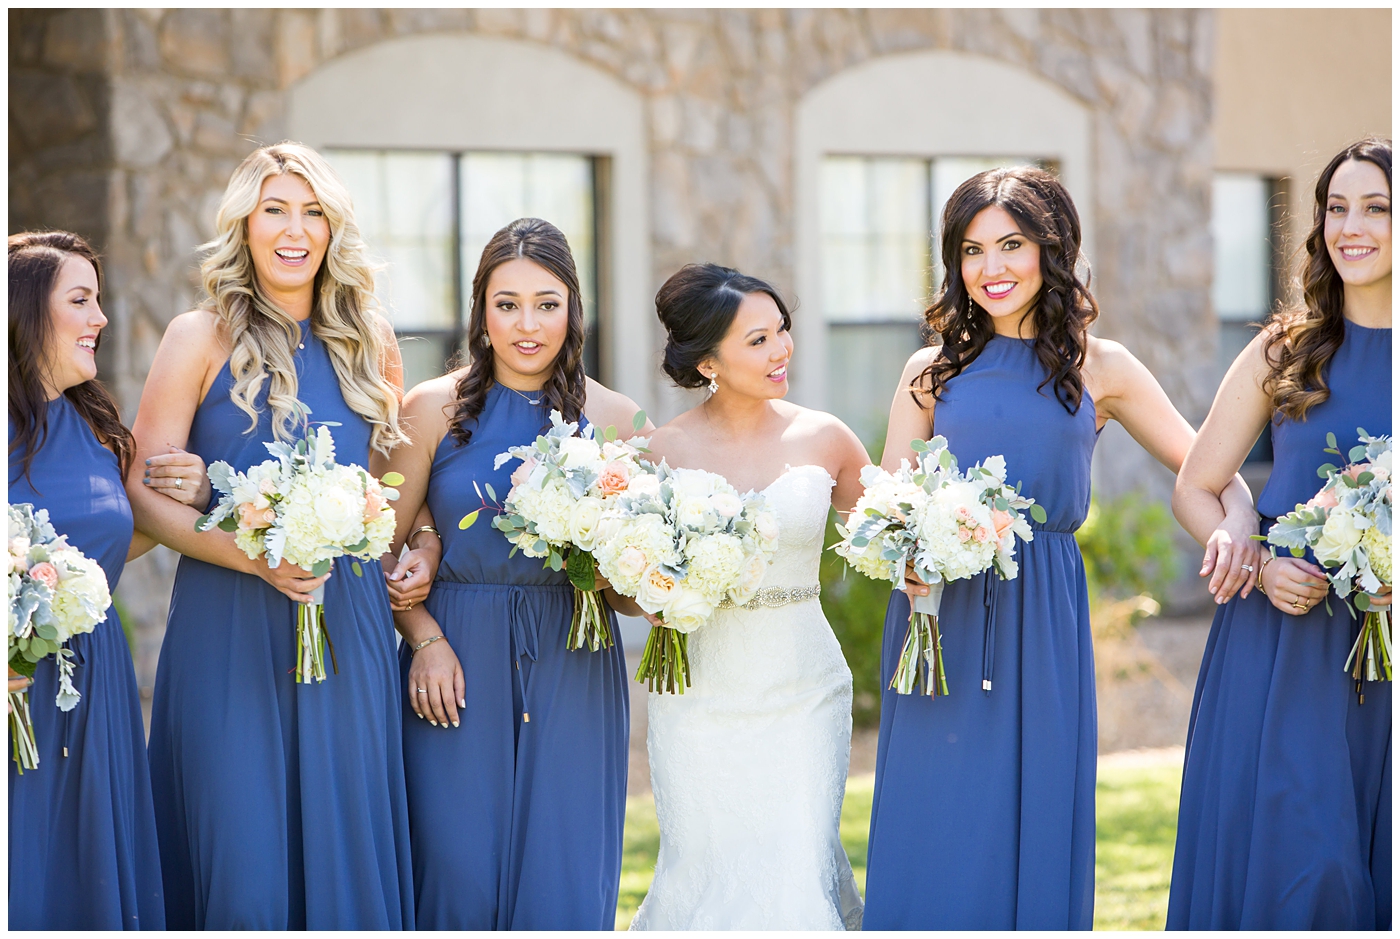 Bride in strapless maggie sorrento dress with soft white and pink roses bouquet with bridesmaids in long blue maxi dresses with bouquets bridal party wedding day pictures